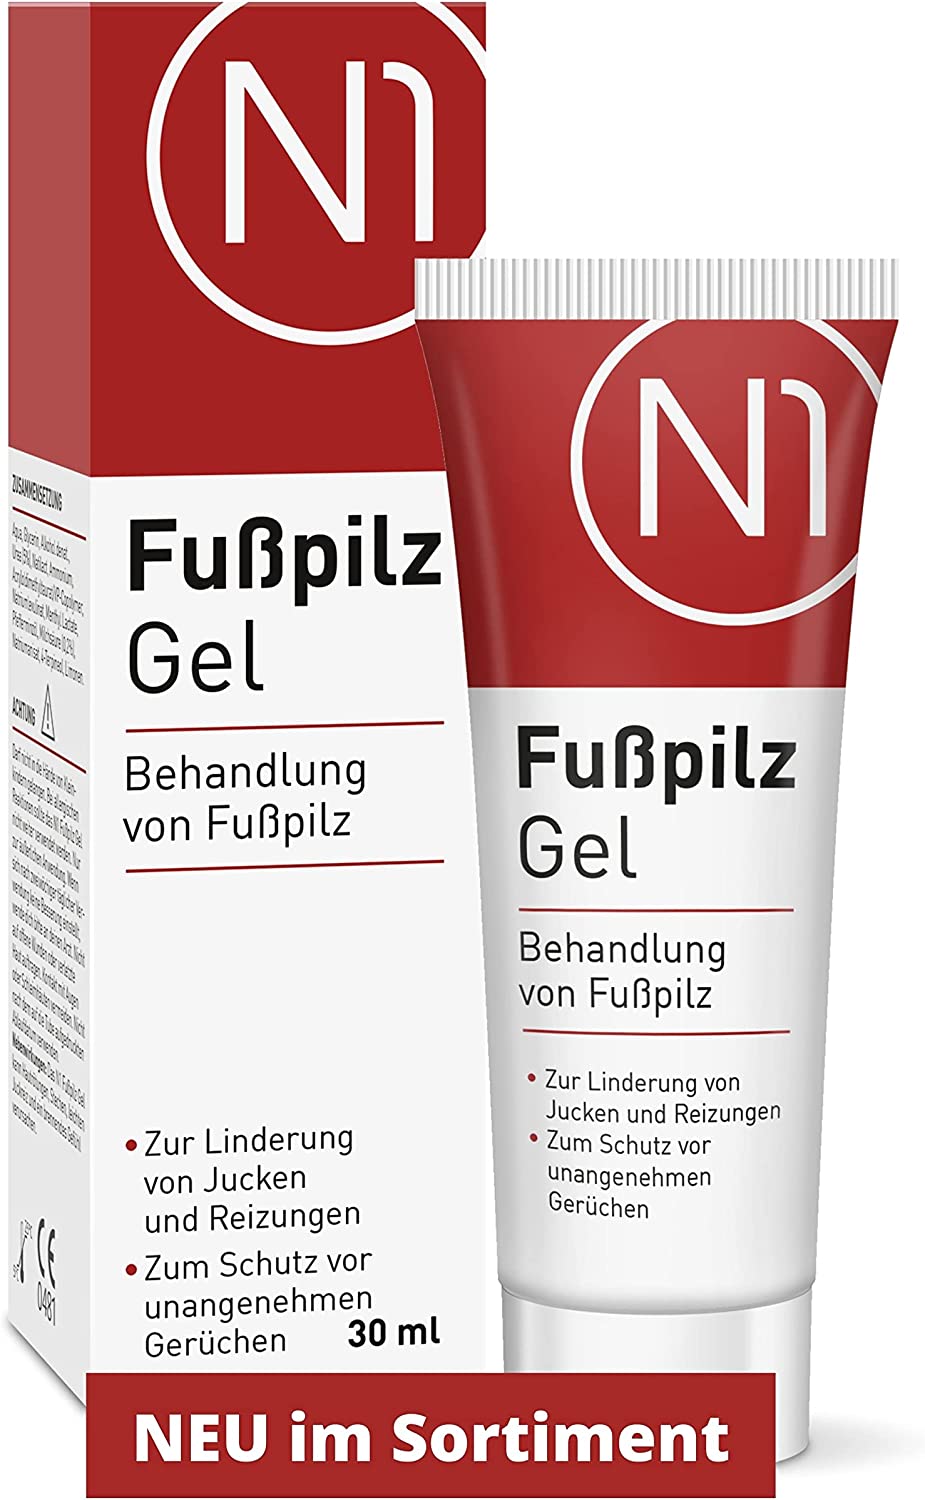 N1 Athlete\'s Foot Gel 30 ml – [Relieves Itching and Protects Against Unpleasant Odours] – Foot Cream / Medical Device for Treatment of Athlete\'s Foot – Visible Results After a Few Days – Pharmacy P